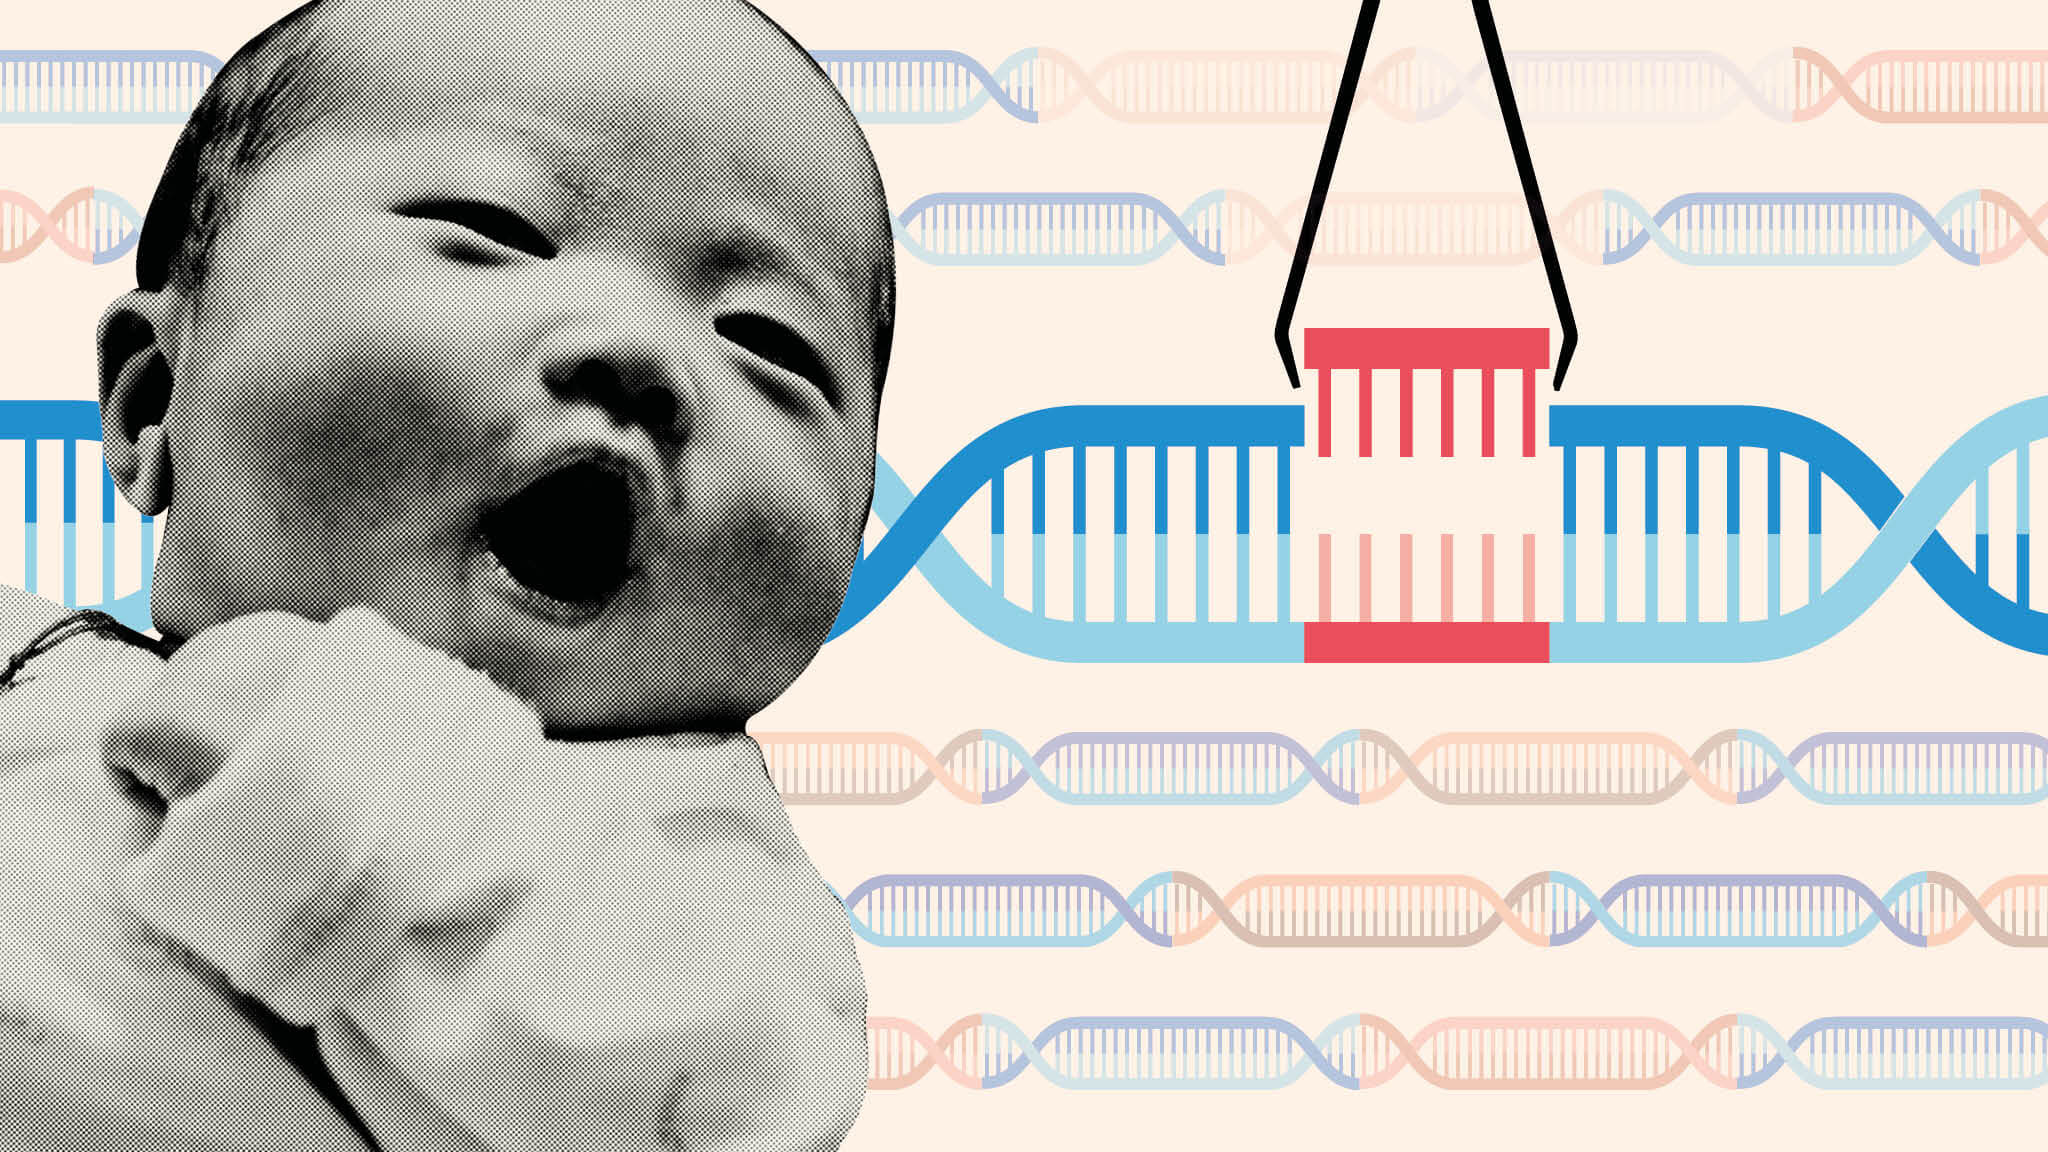 China confirmed the birth of a third child, genetically modified